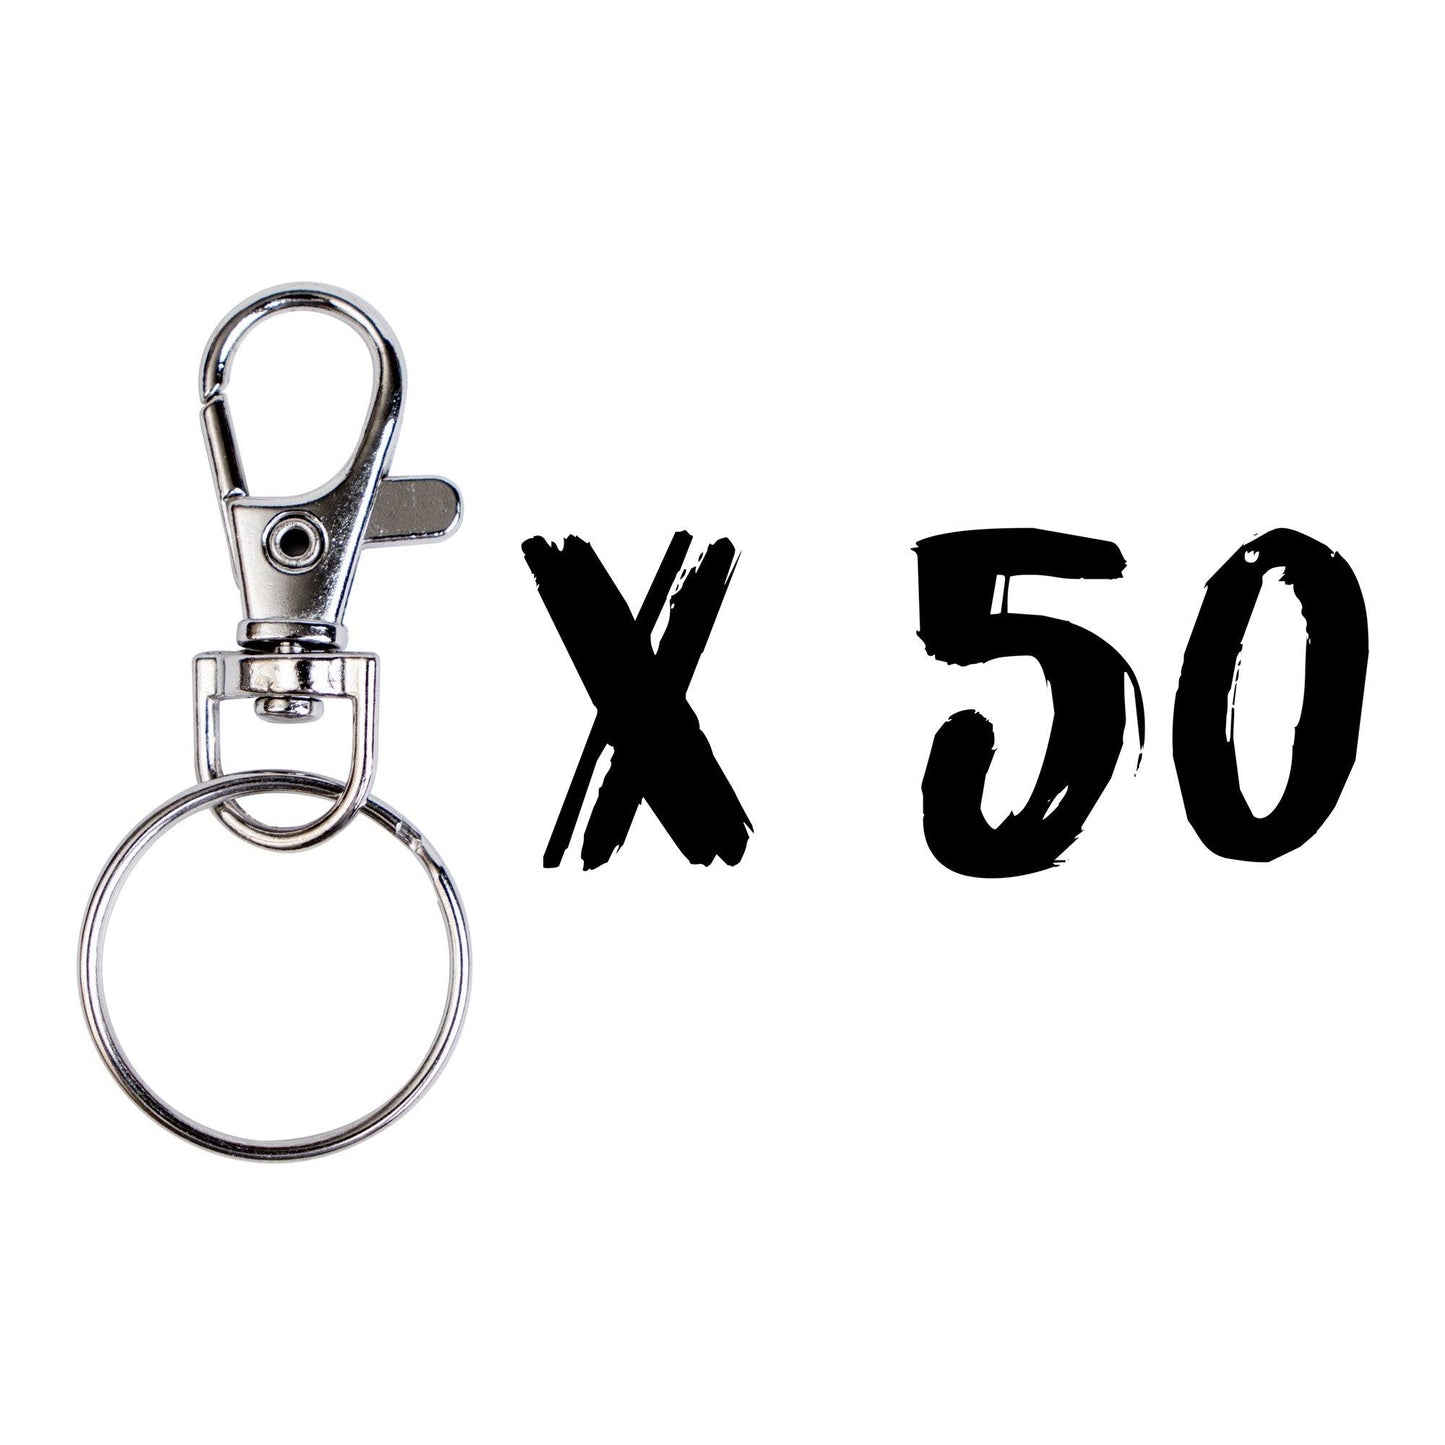 MakerFlo Crafts 50ct Assembled Keychain Rings with Lobster Clasp, Acrylic